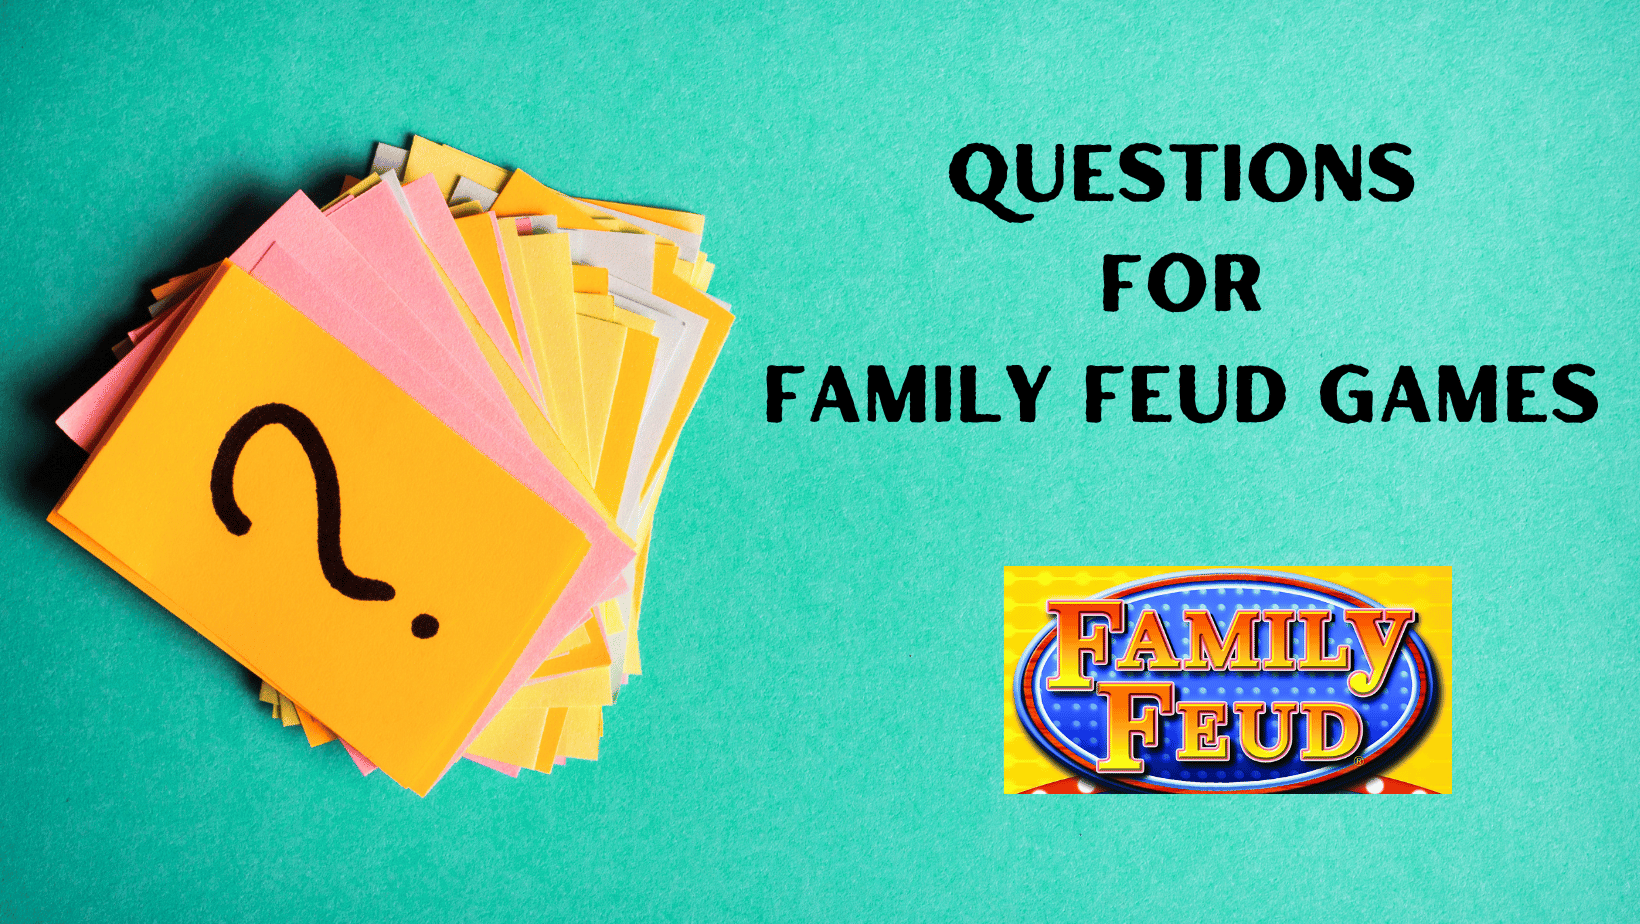 Family Feud Game Questions And Answers To Help You Host